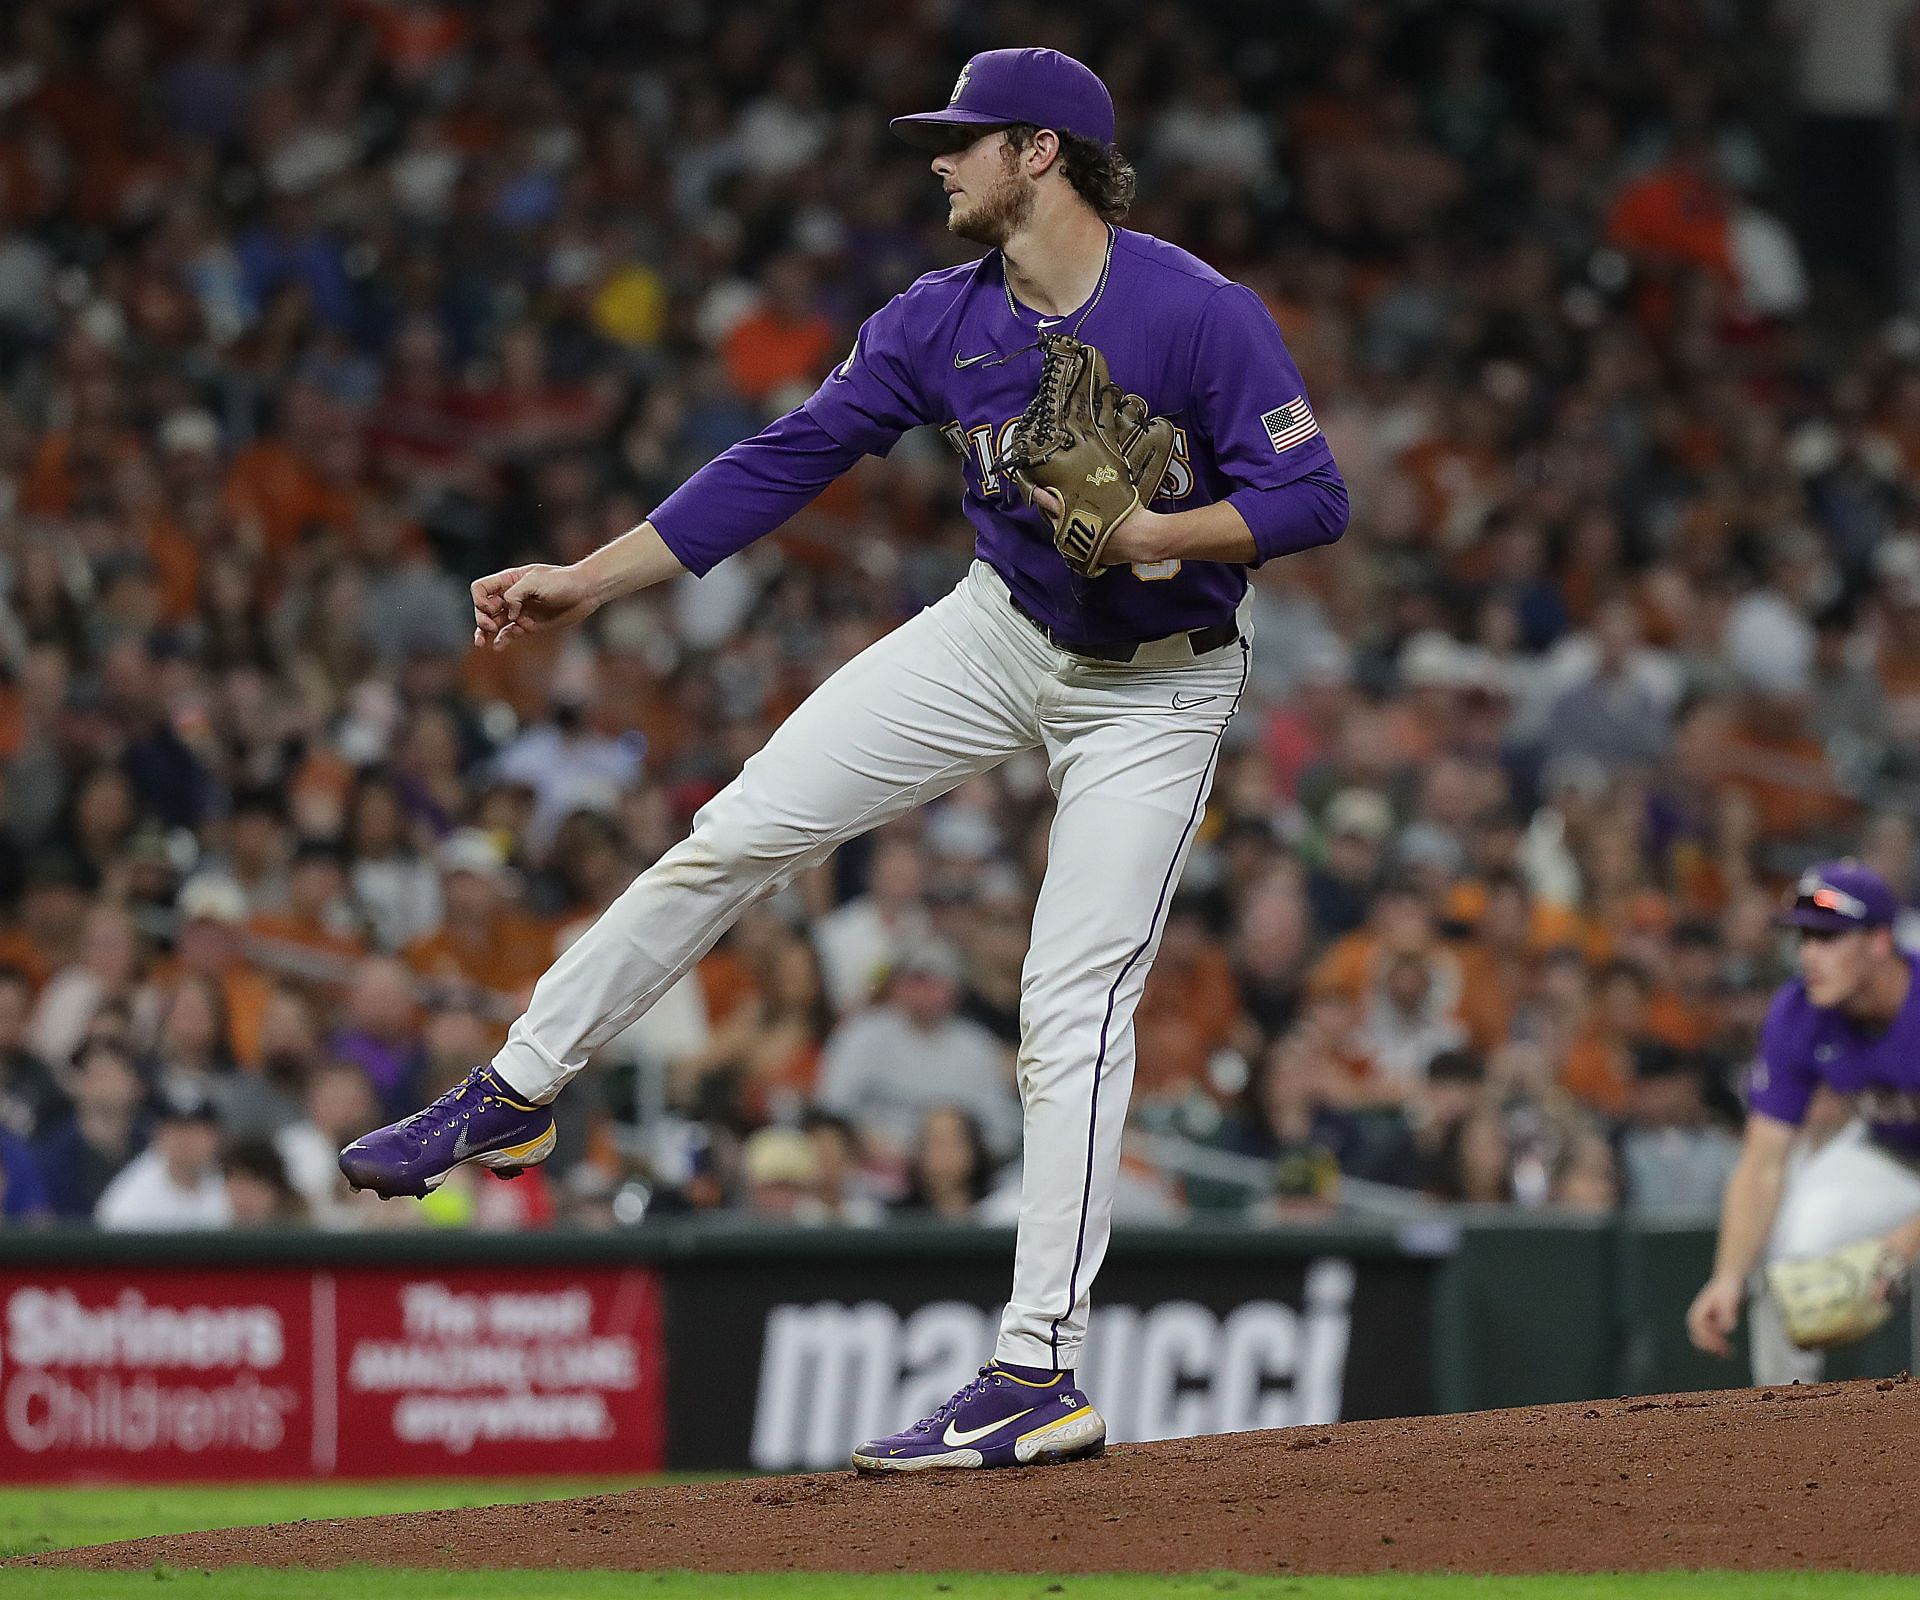 LSU beats SEC rival Tennessee 6-3 at the College World Series with